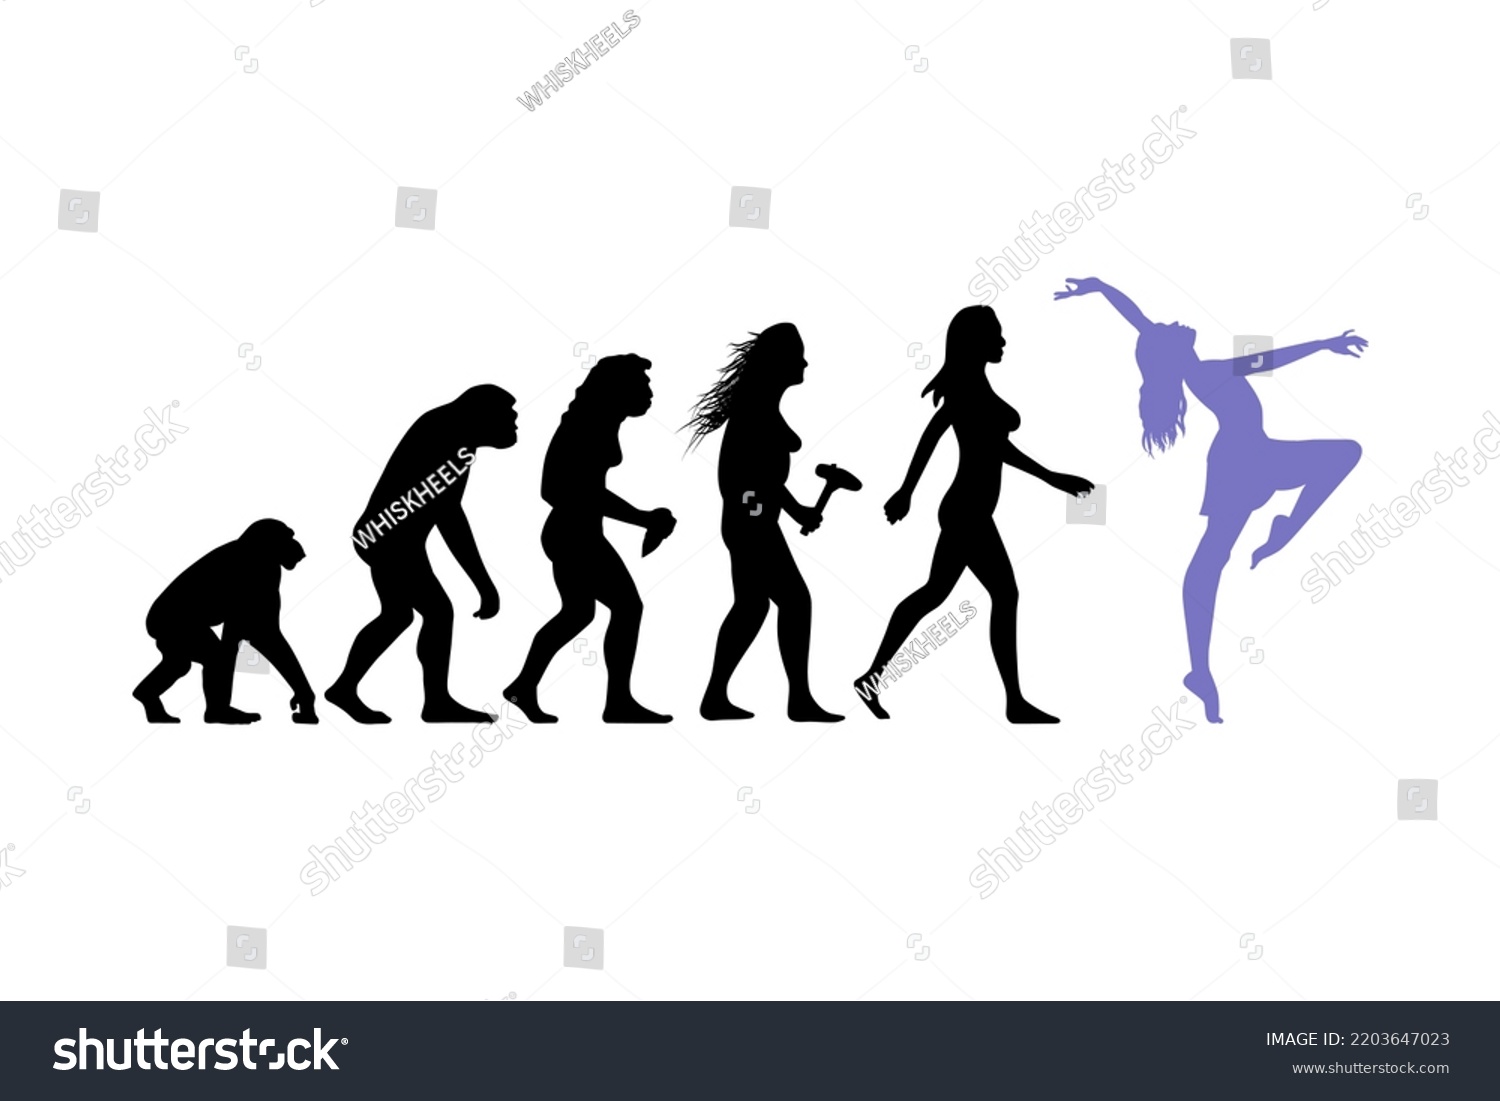 SVG of Theory of evolution of woman silhouette from ape to dancer. Vector illustration svg